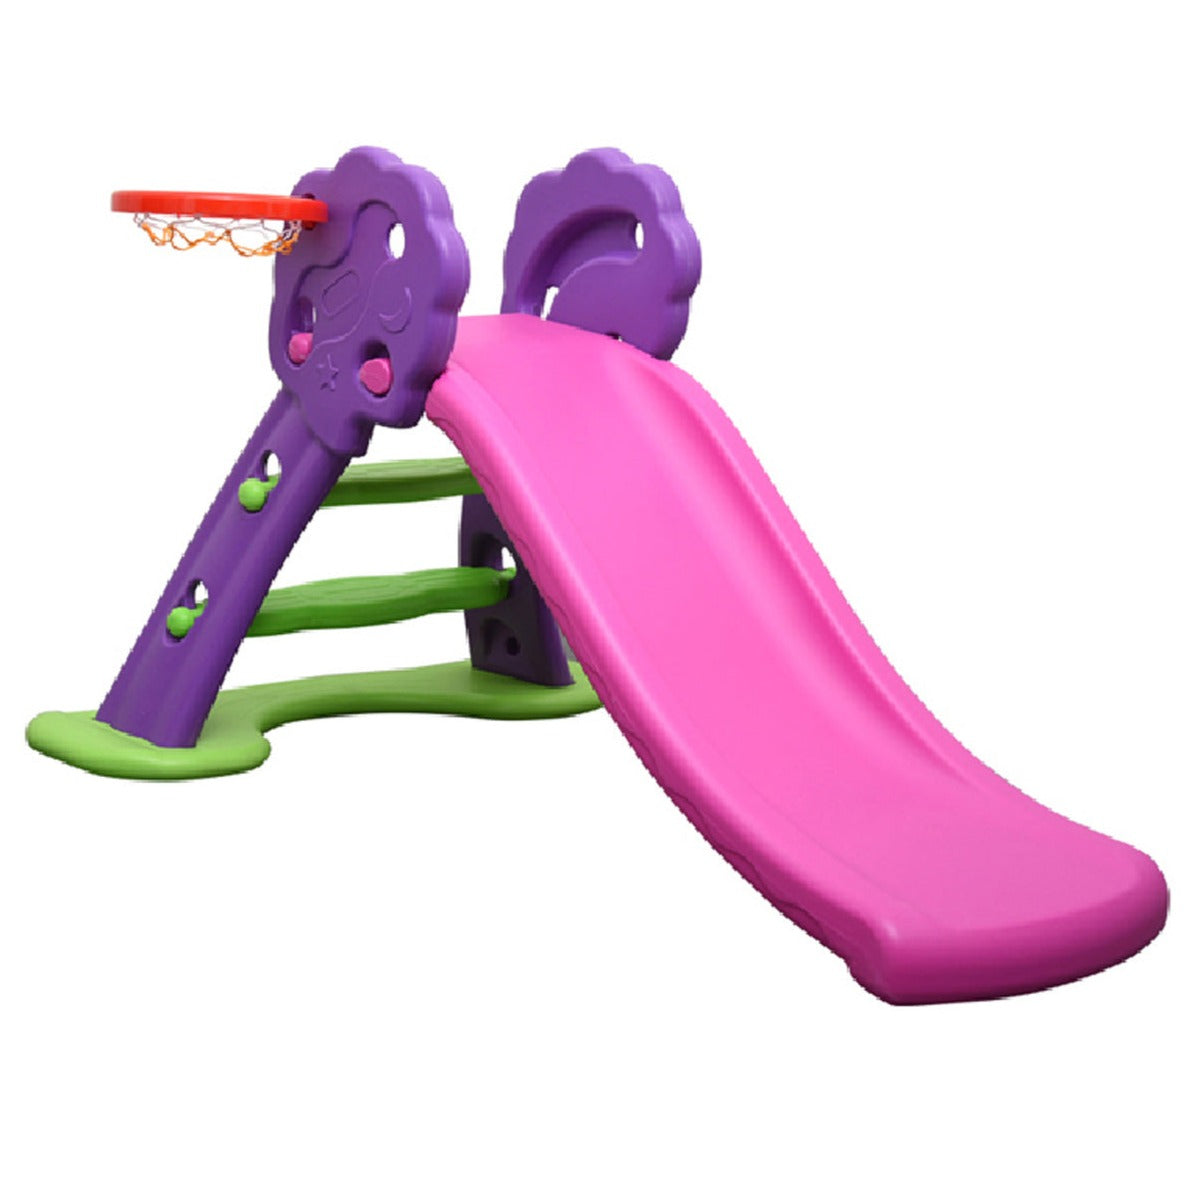 SLIDE with Basketball ring